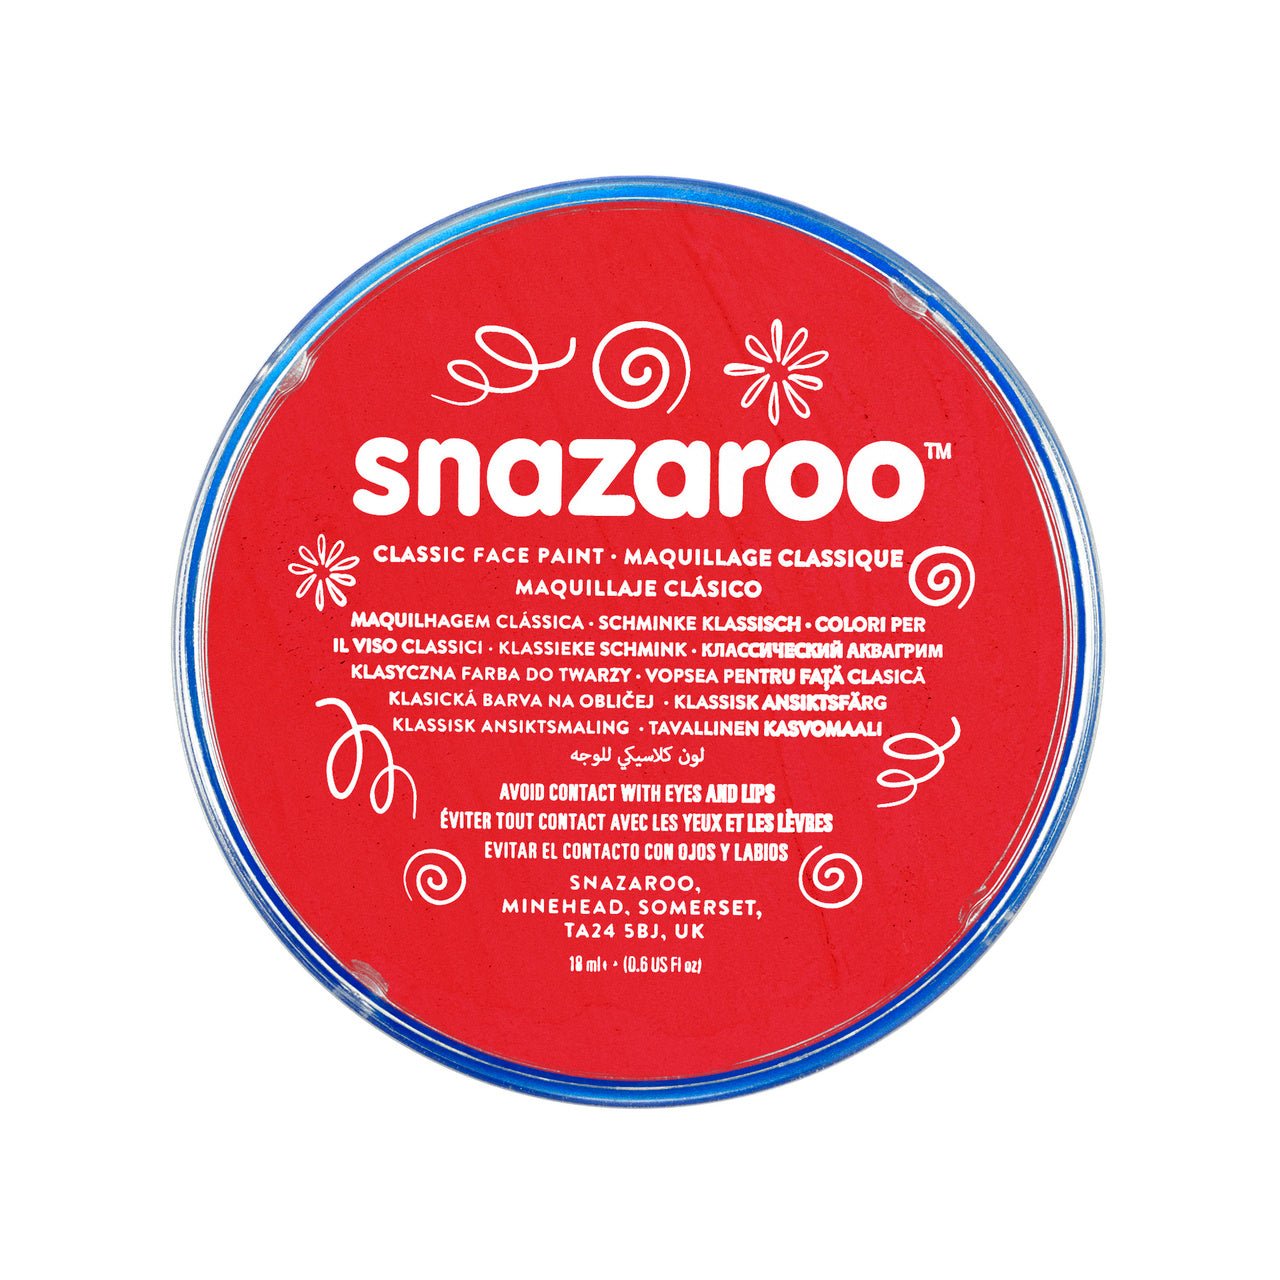 Snazaroo Face Paint 18 ml Bright Red - merriartist.com